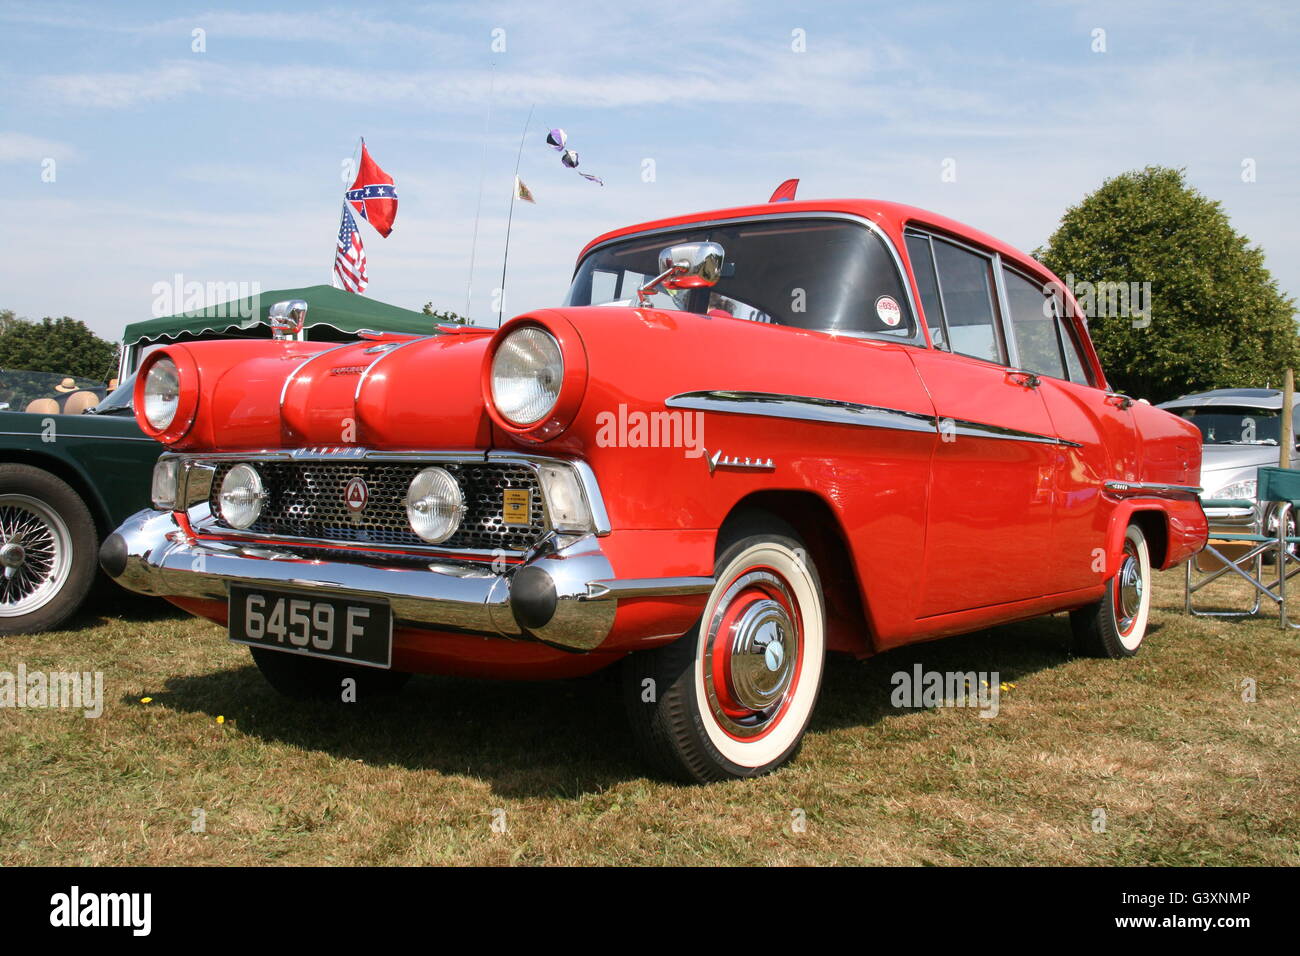 A VINTAGE VAUXHALL VICTOR CAR IN COLOUR GYPSEY RED AT A CLASSIC CAR SHOW Stock Photo